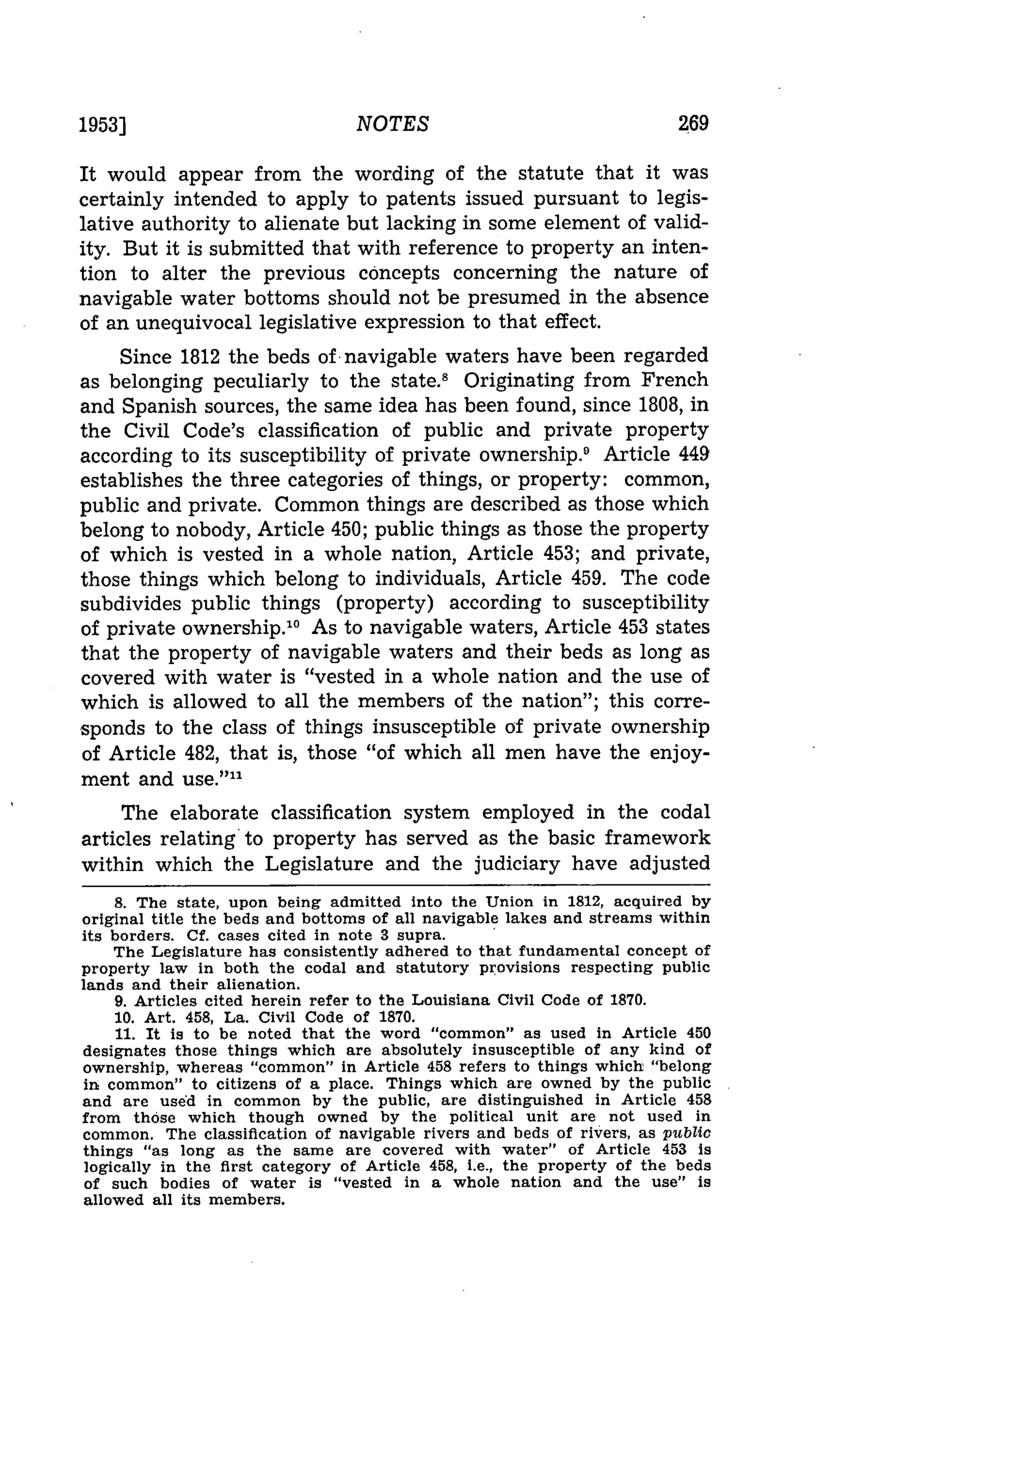 1953] NOTES It would appear from the wording of the statute that it was certainly intended to apply to patents issued pursuant to legislative authority to alienate but lacking in some element of